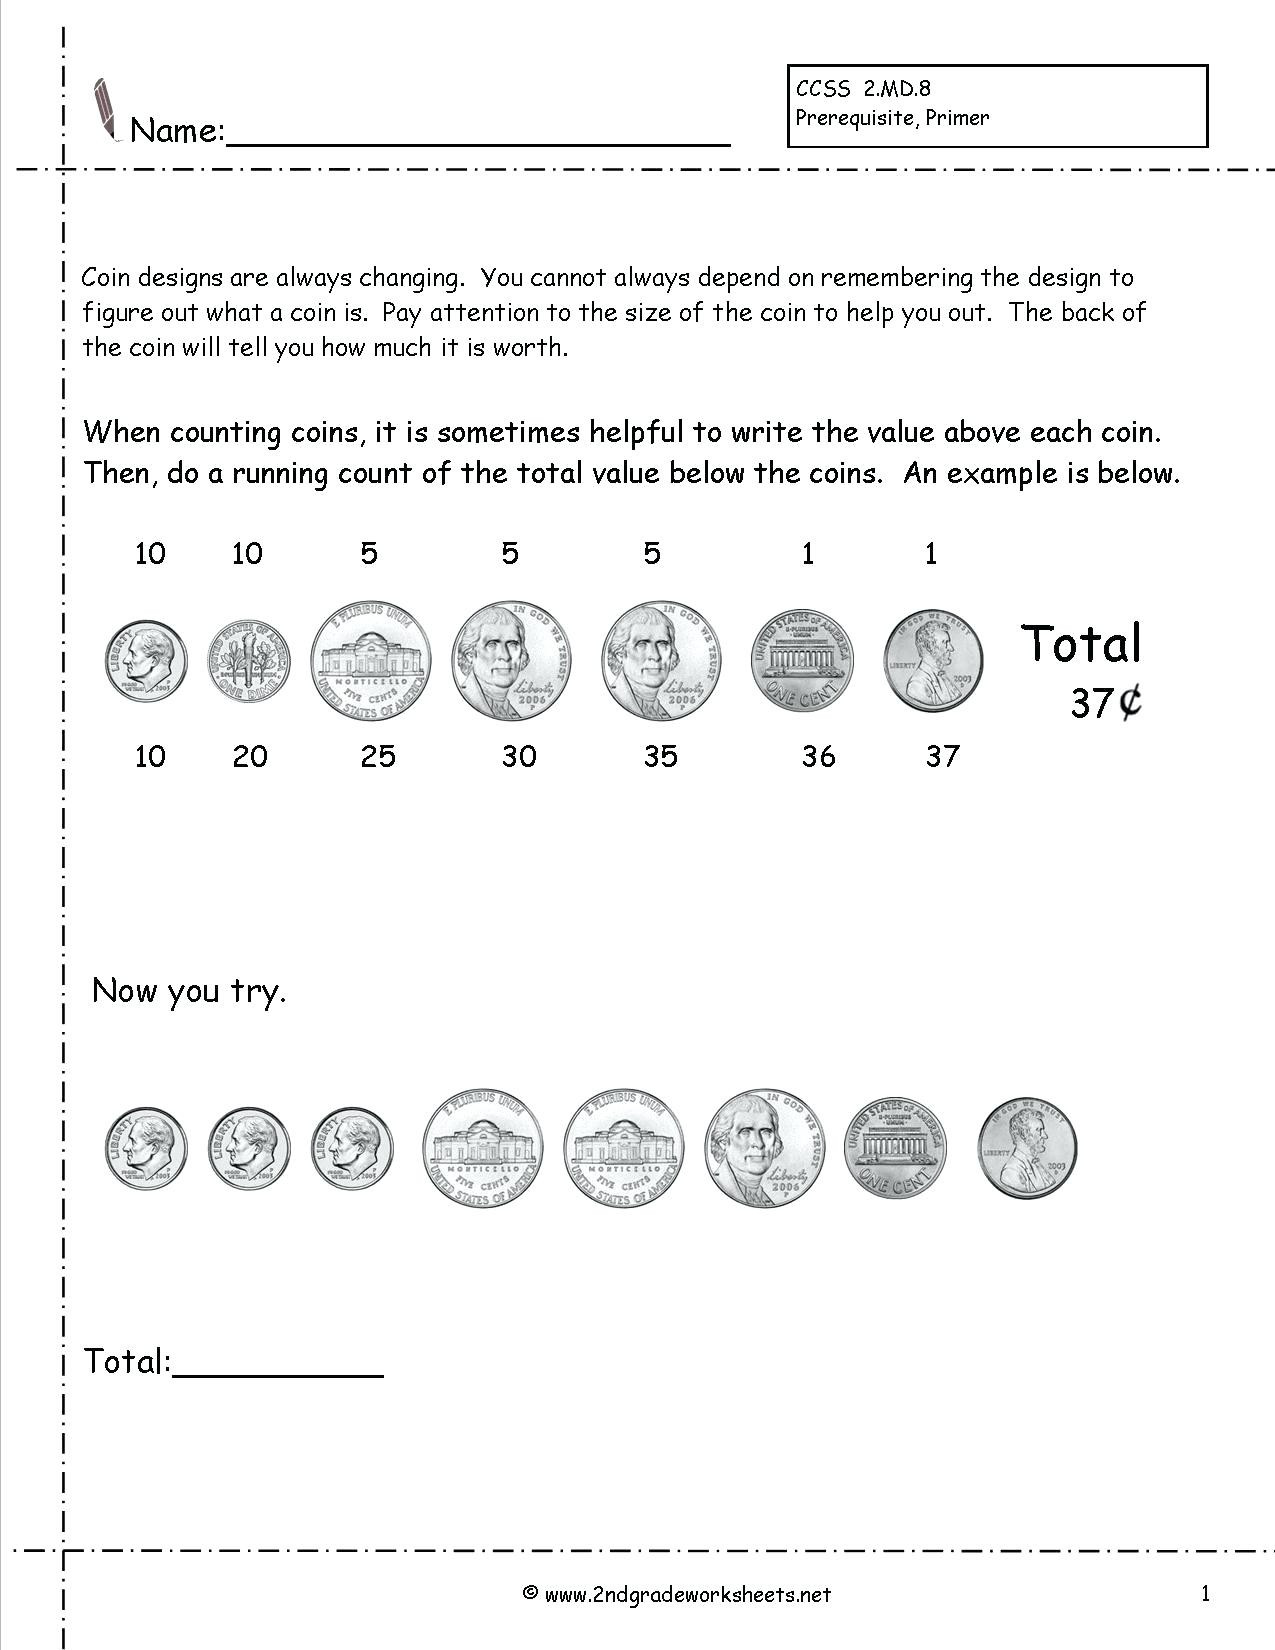 Free Math Worksheets First Grade 1 Counting Money Counting Money Pennies Dimes